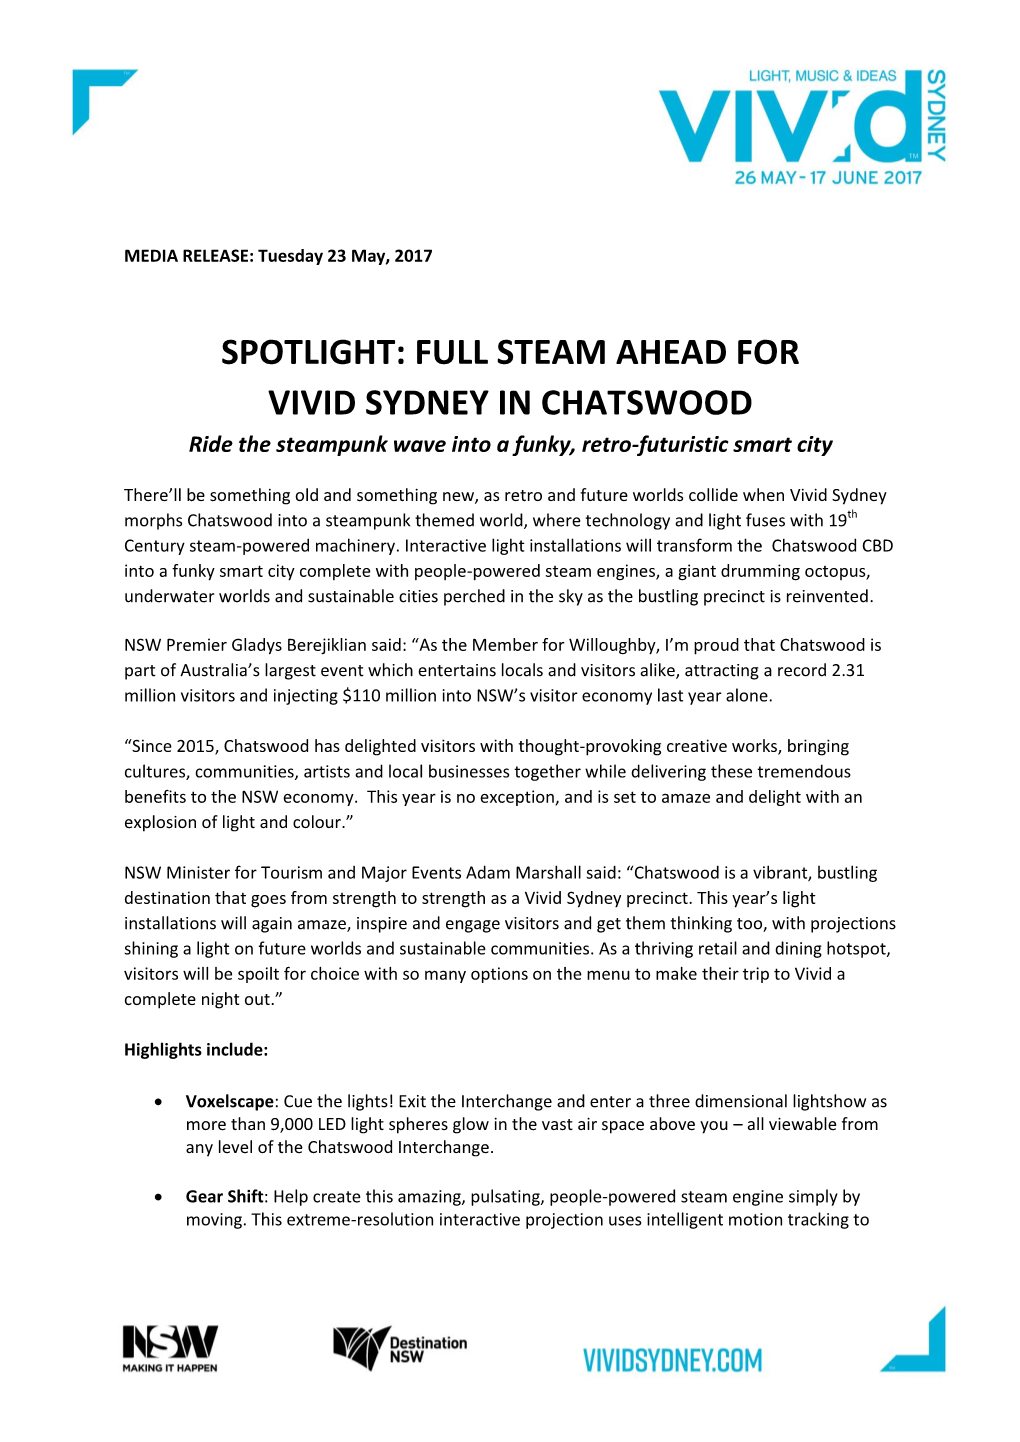 FULL STEAM AHEAD for VIVID SYDNEY in CHATSWOOD Ride the Steampunk Wave Into a Funky, Retro-Futuristic Smart City